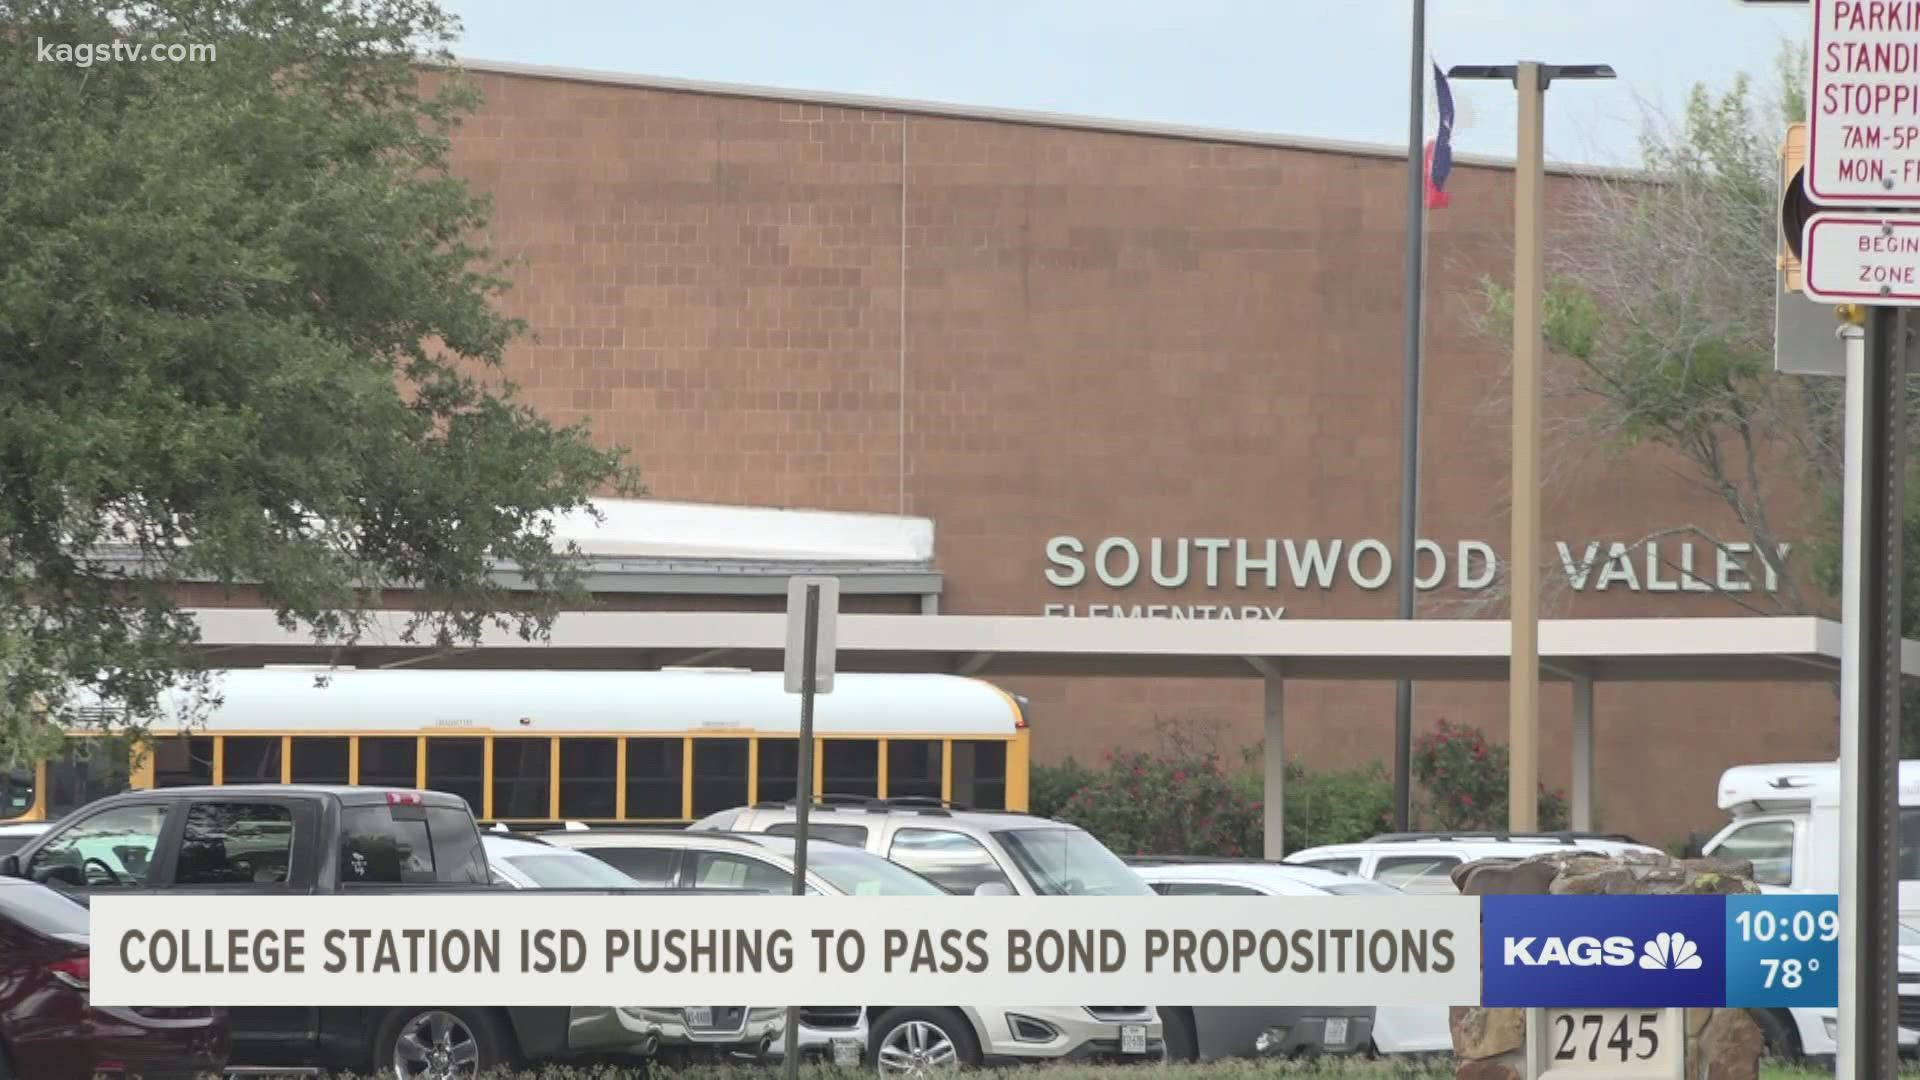 The school wants to ensure that the proposals will not exceed the current debt service tax rate.